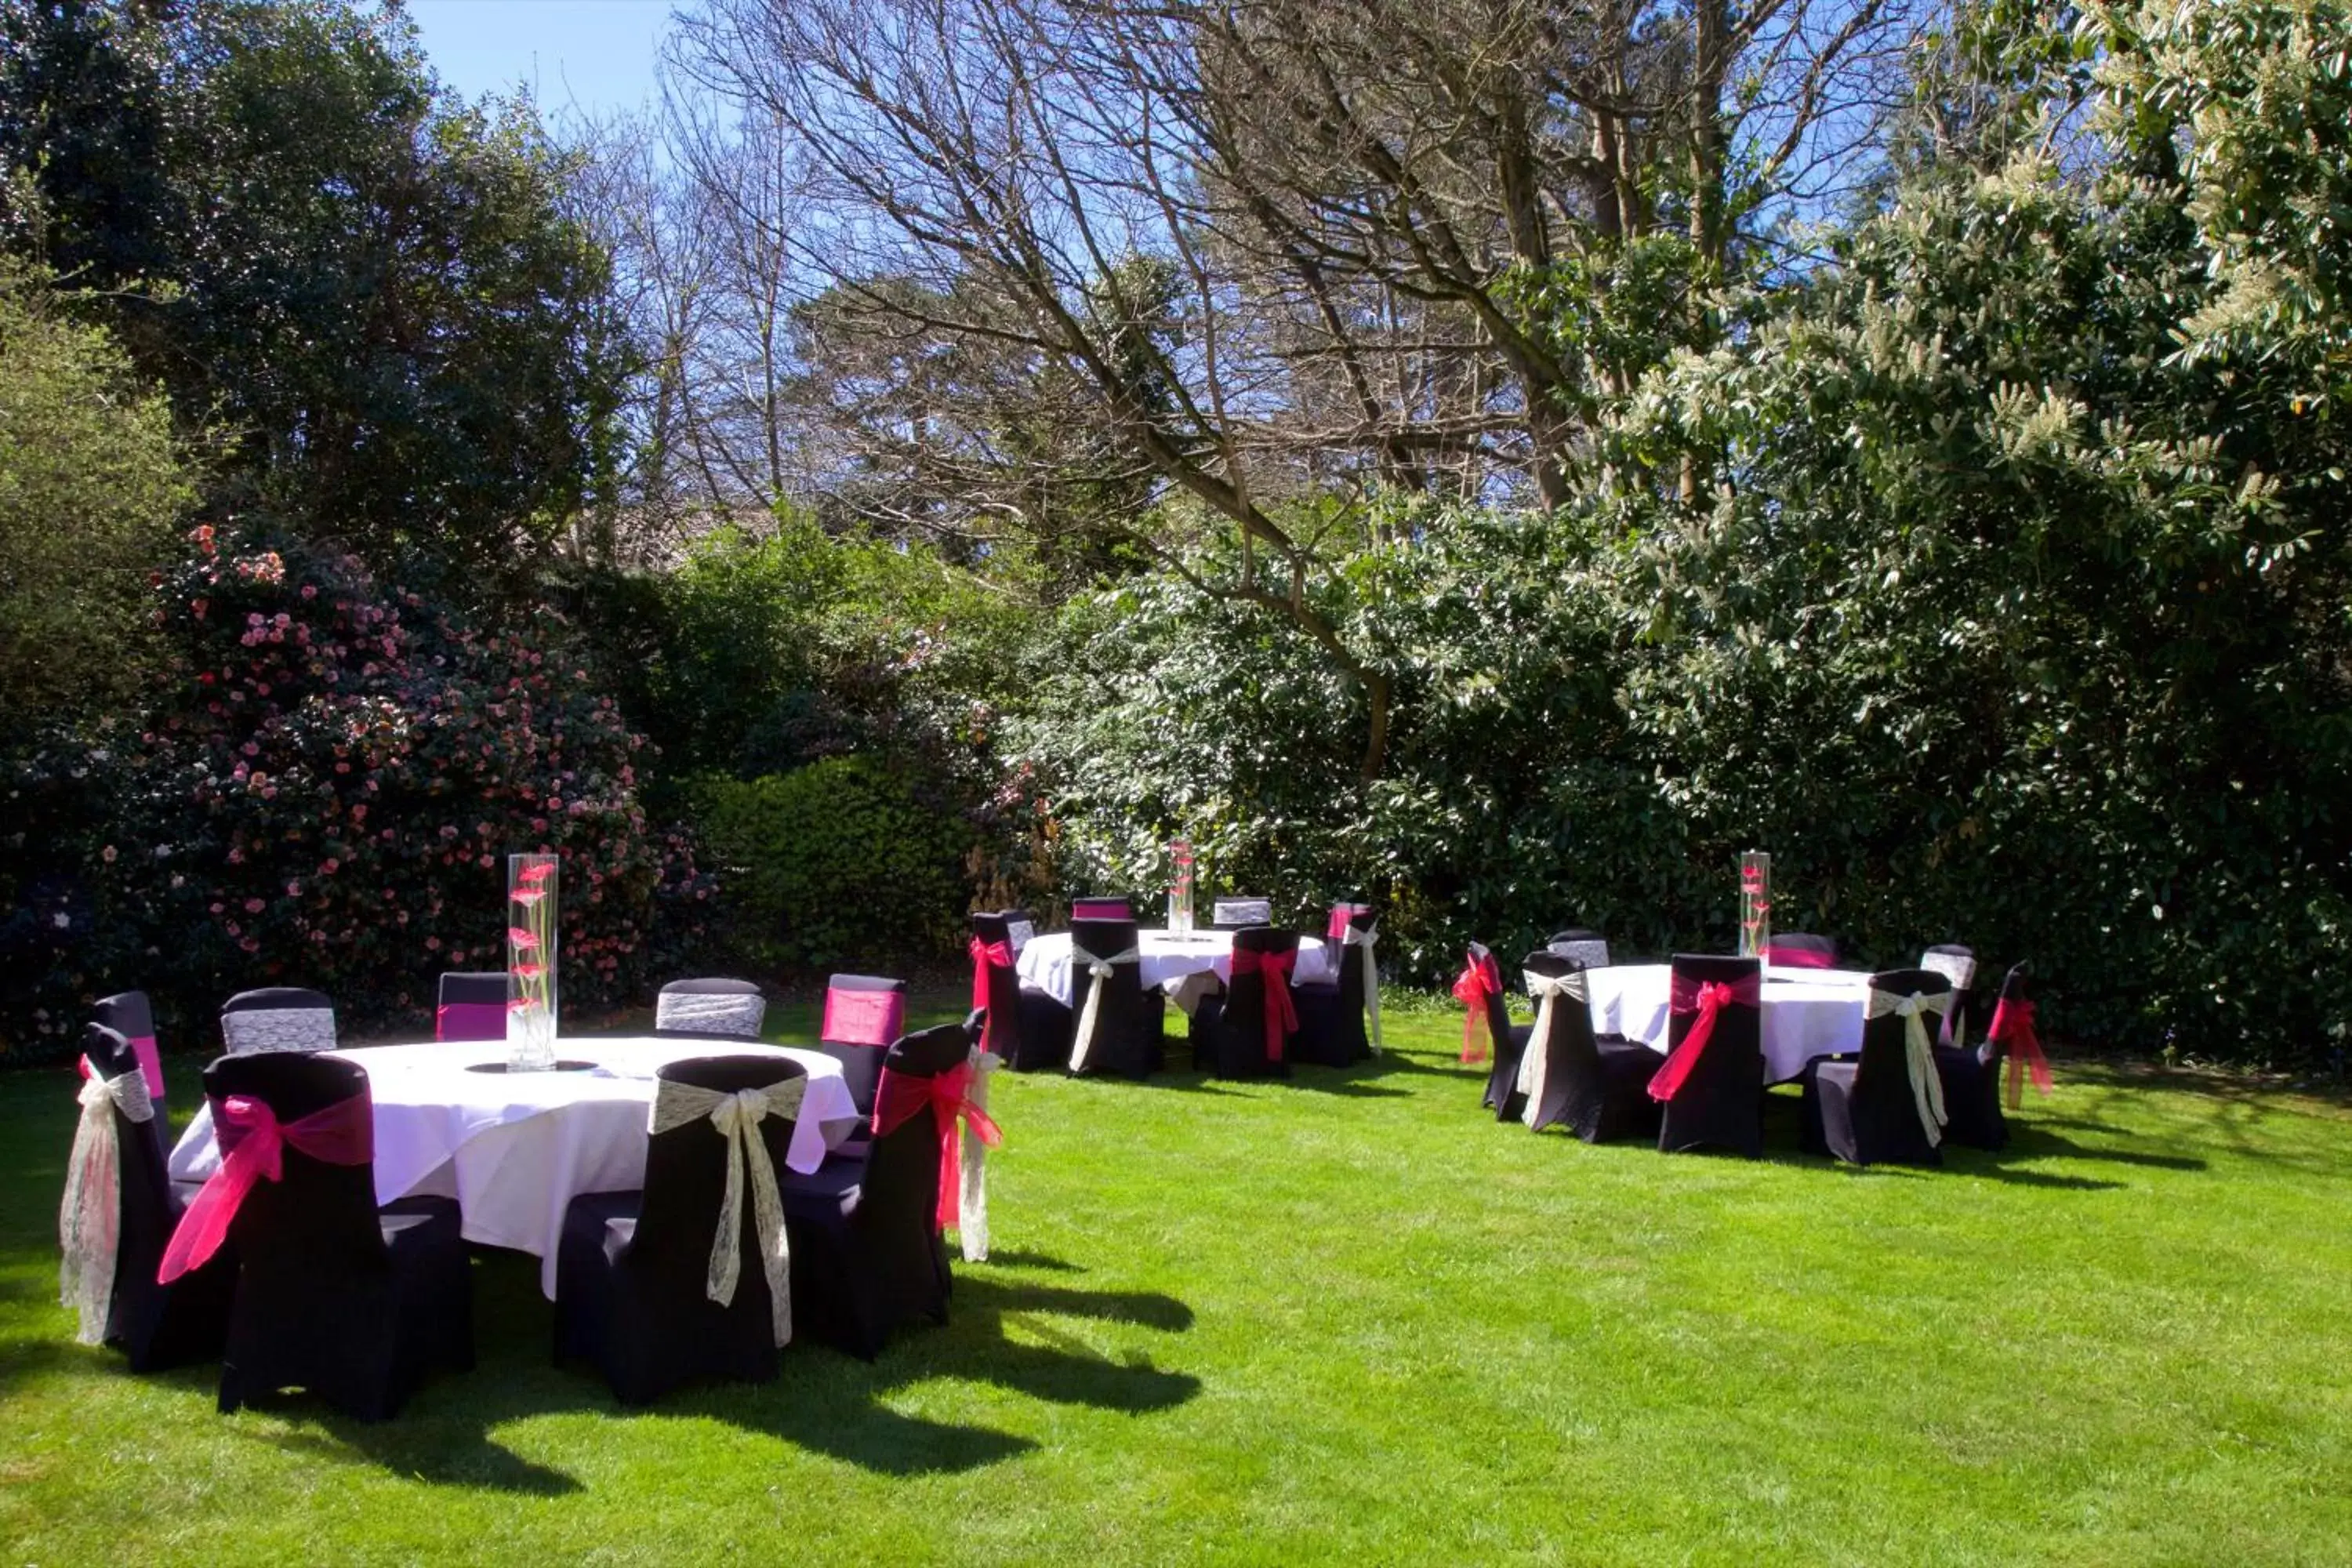 BBQ facilities, Banquet Facilities in Bournemouth West Cliff Hotel